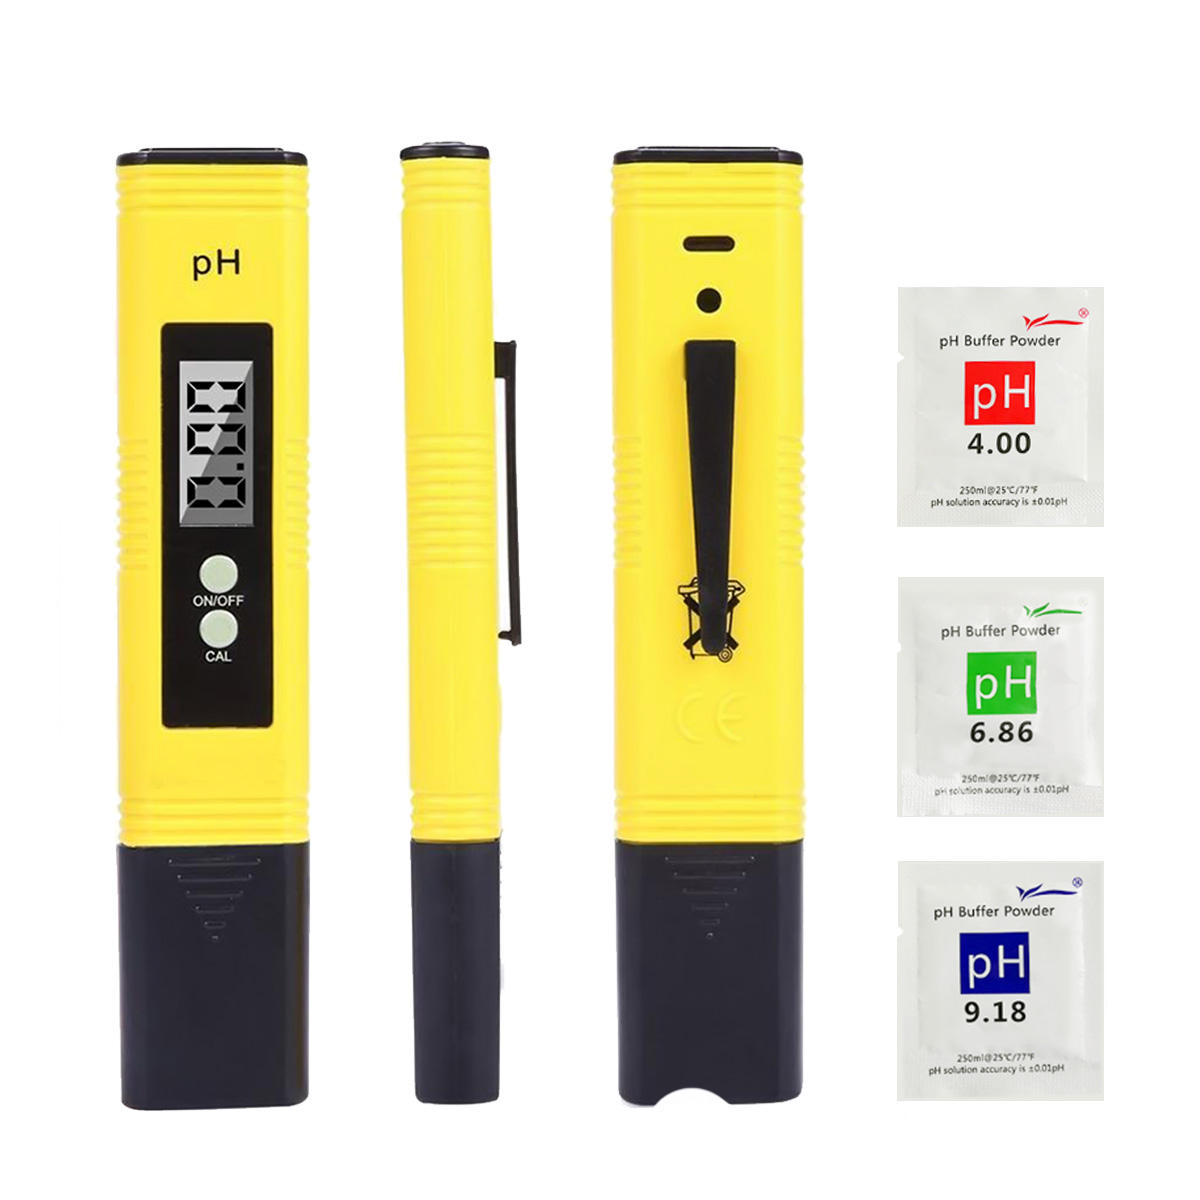 LIUMY Digital PH Meter 0.01 pH Water Quality Test for Household Drinking Water Pool Hydroponics